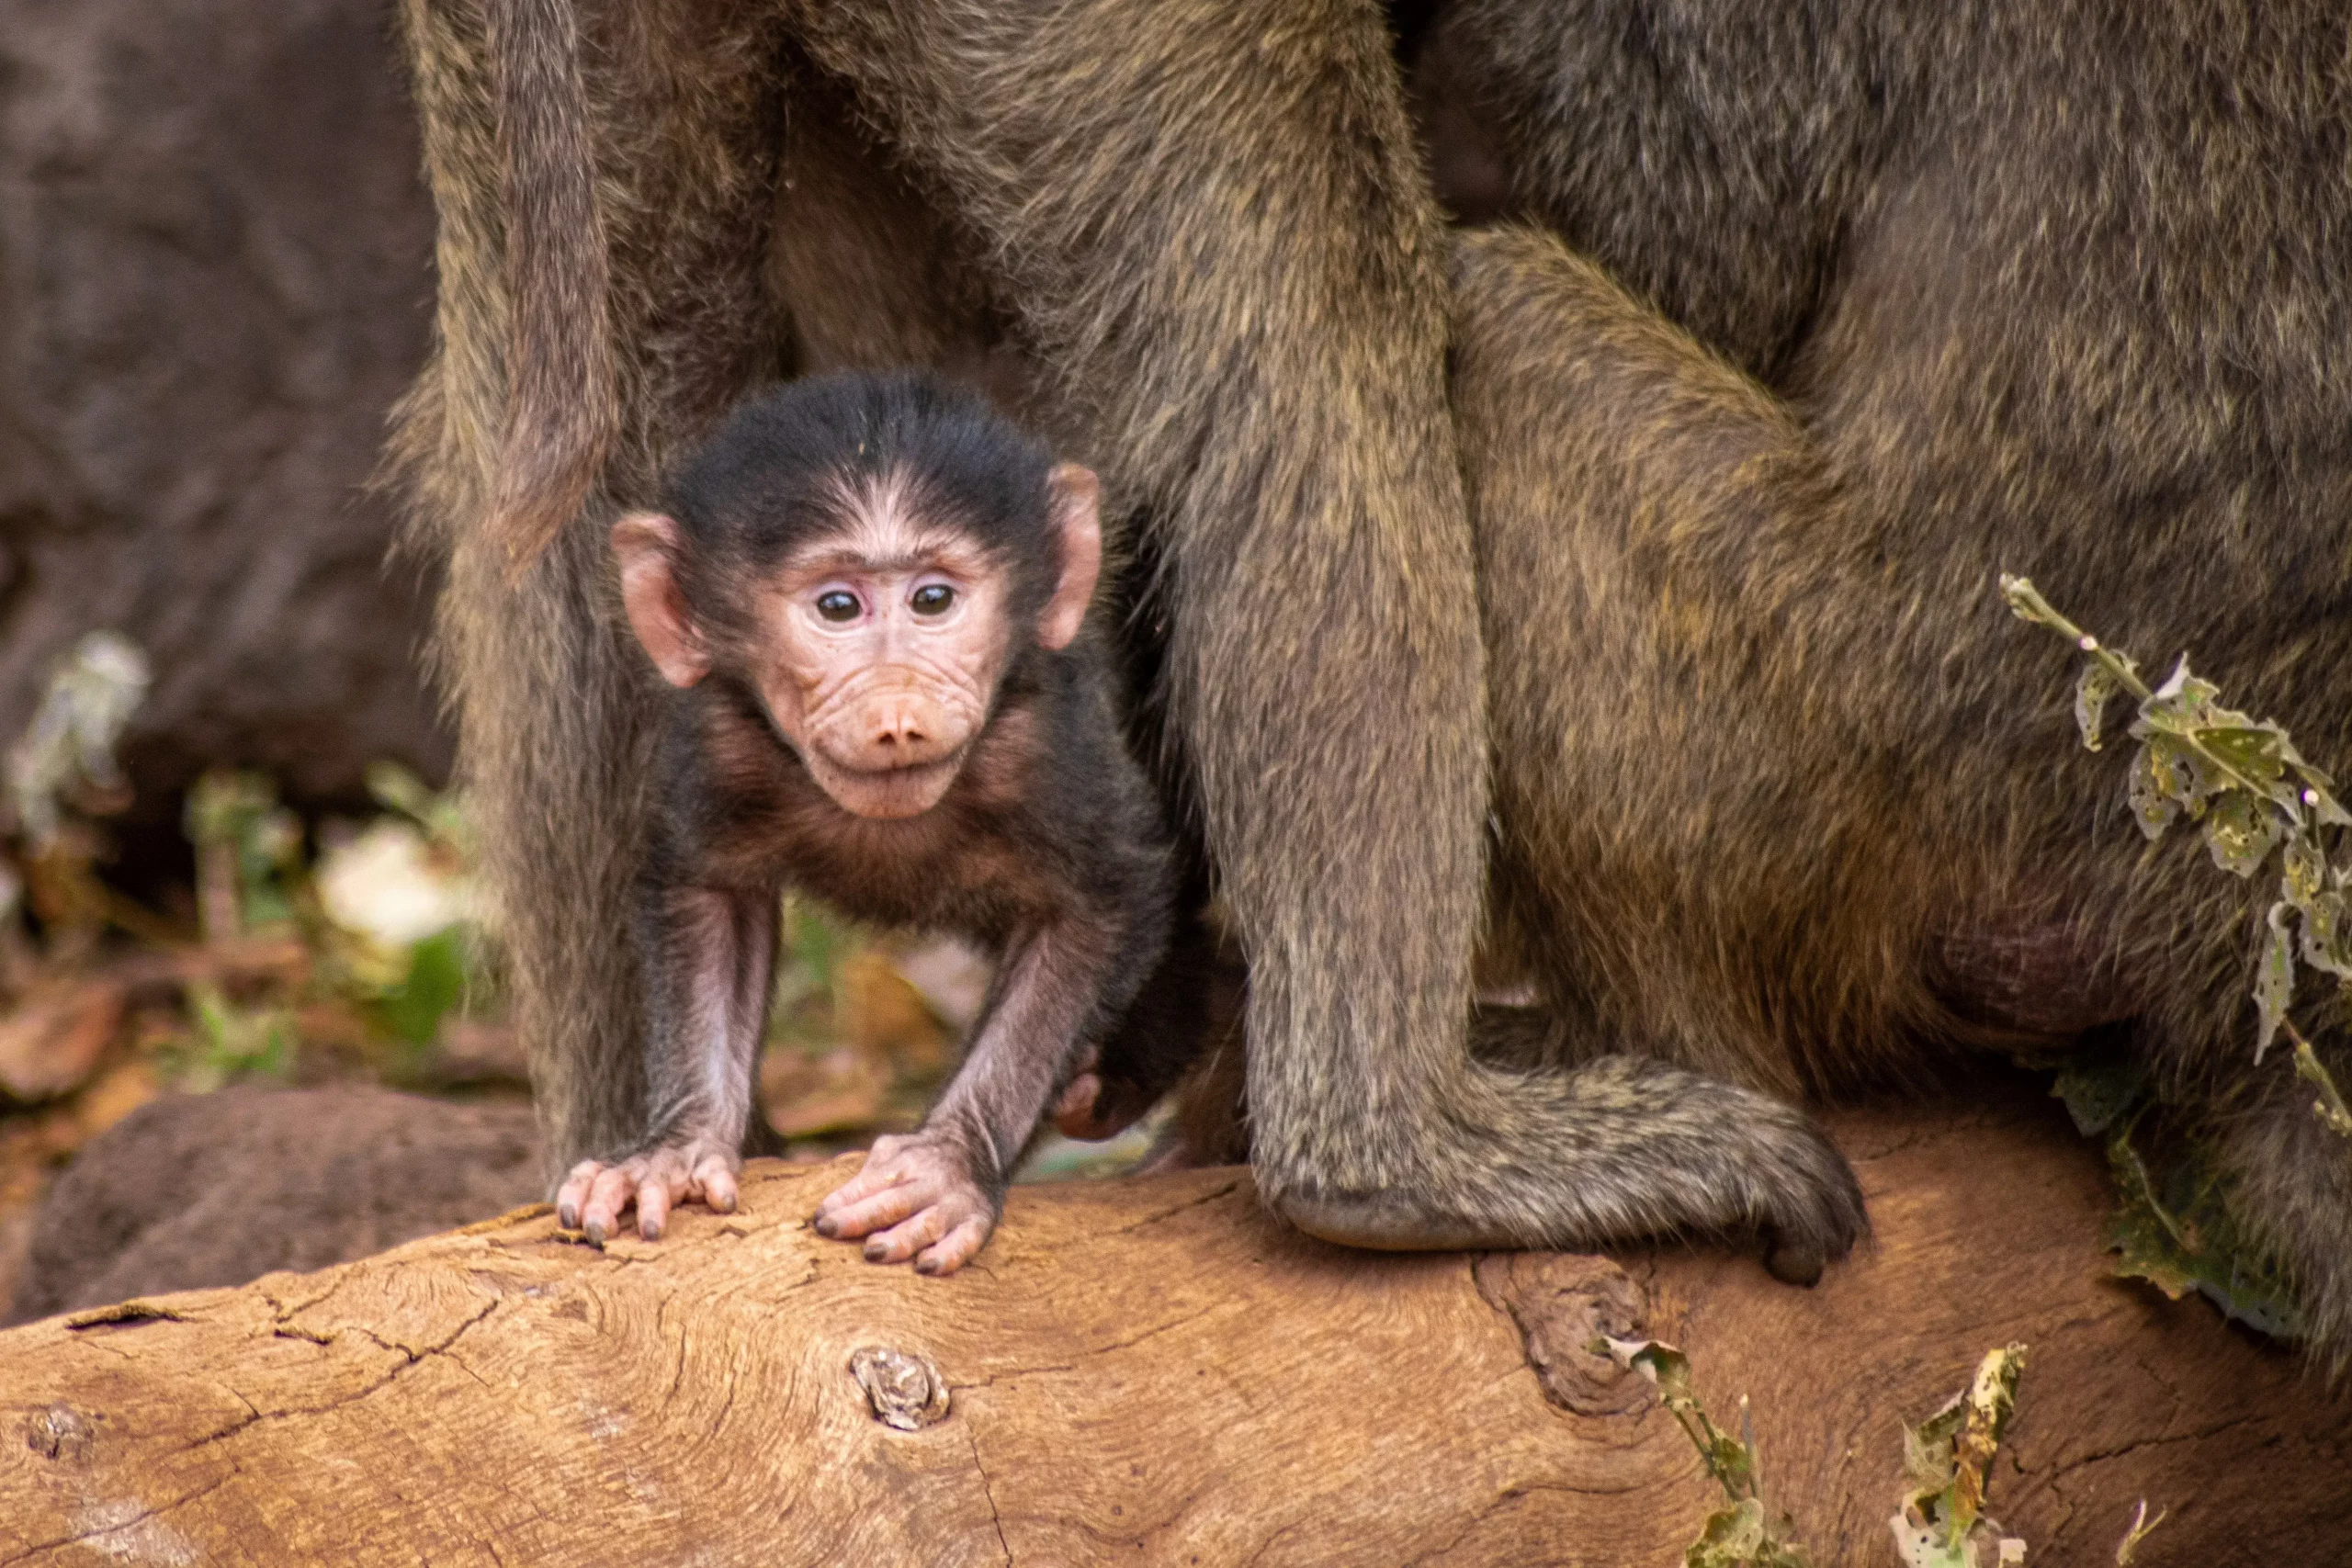 Baby olive baboon spotted while trekking Kilimanjaro